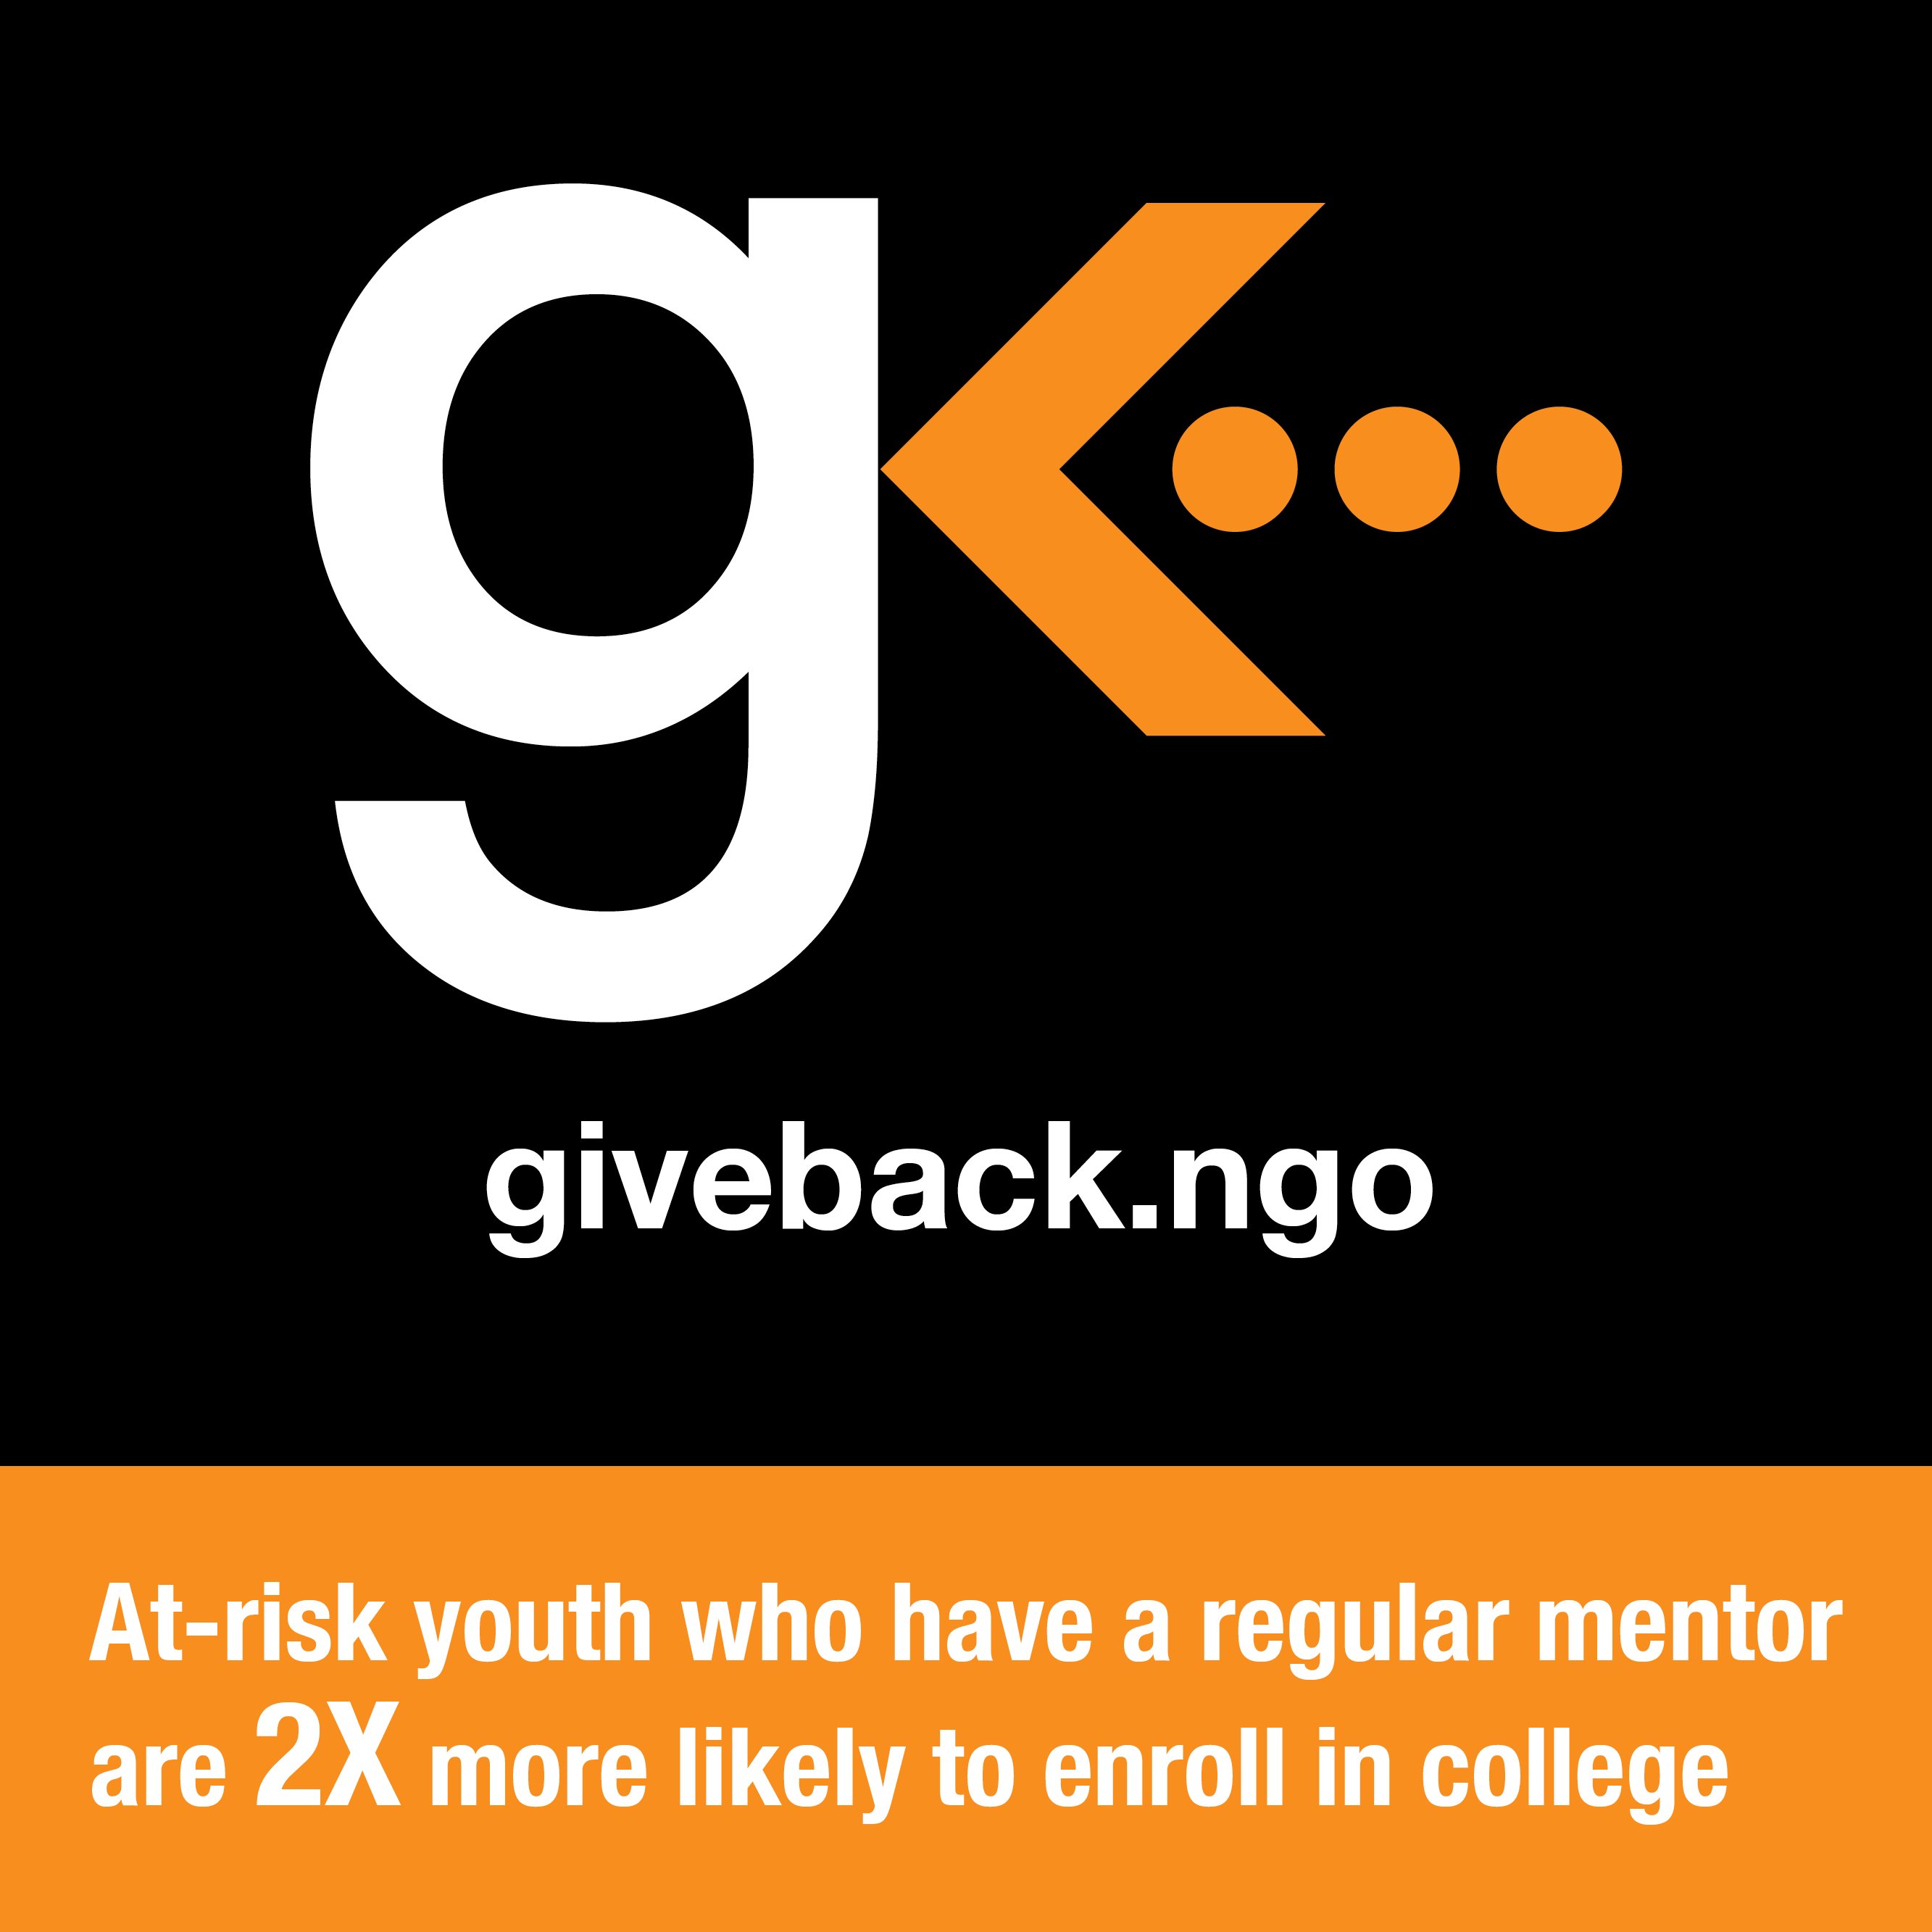 Something Back on "Being a Give Back #mentor is a low-time commitment, high-impact opportunity to change the life a young student. https://t.co/PYlY6Q8EYQ https://t.co/rXLgZzCpNp" / Twitter